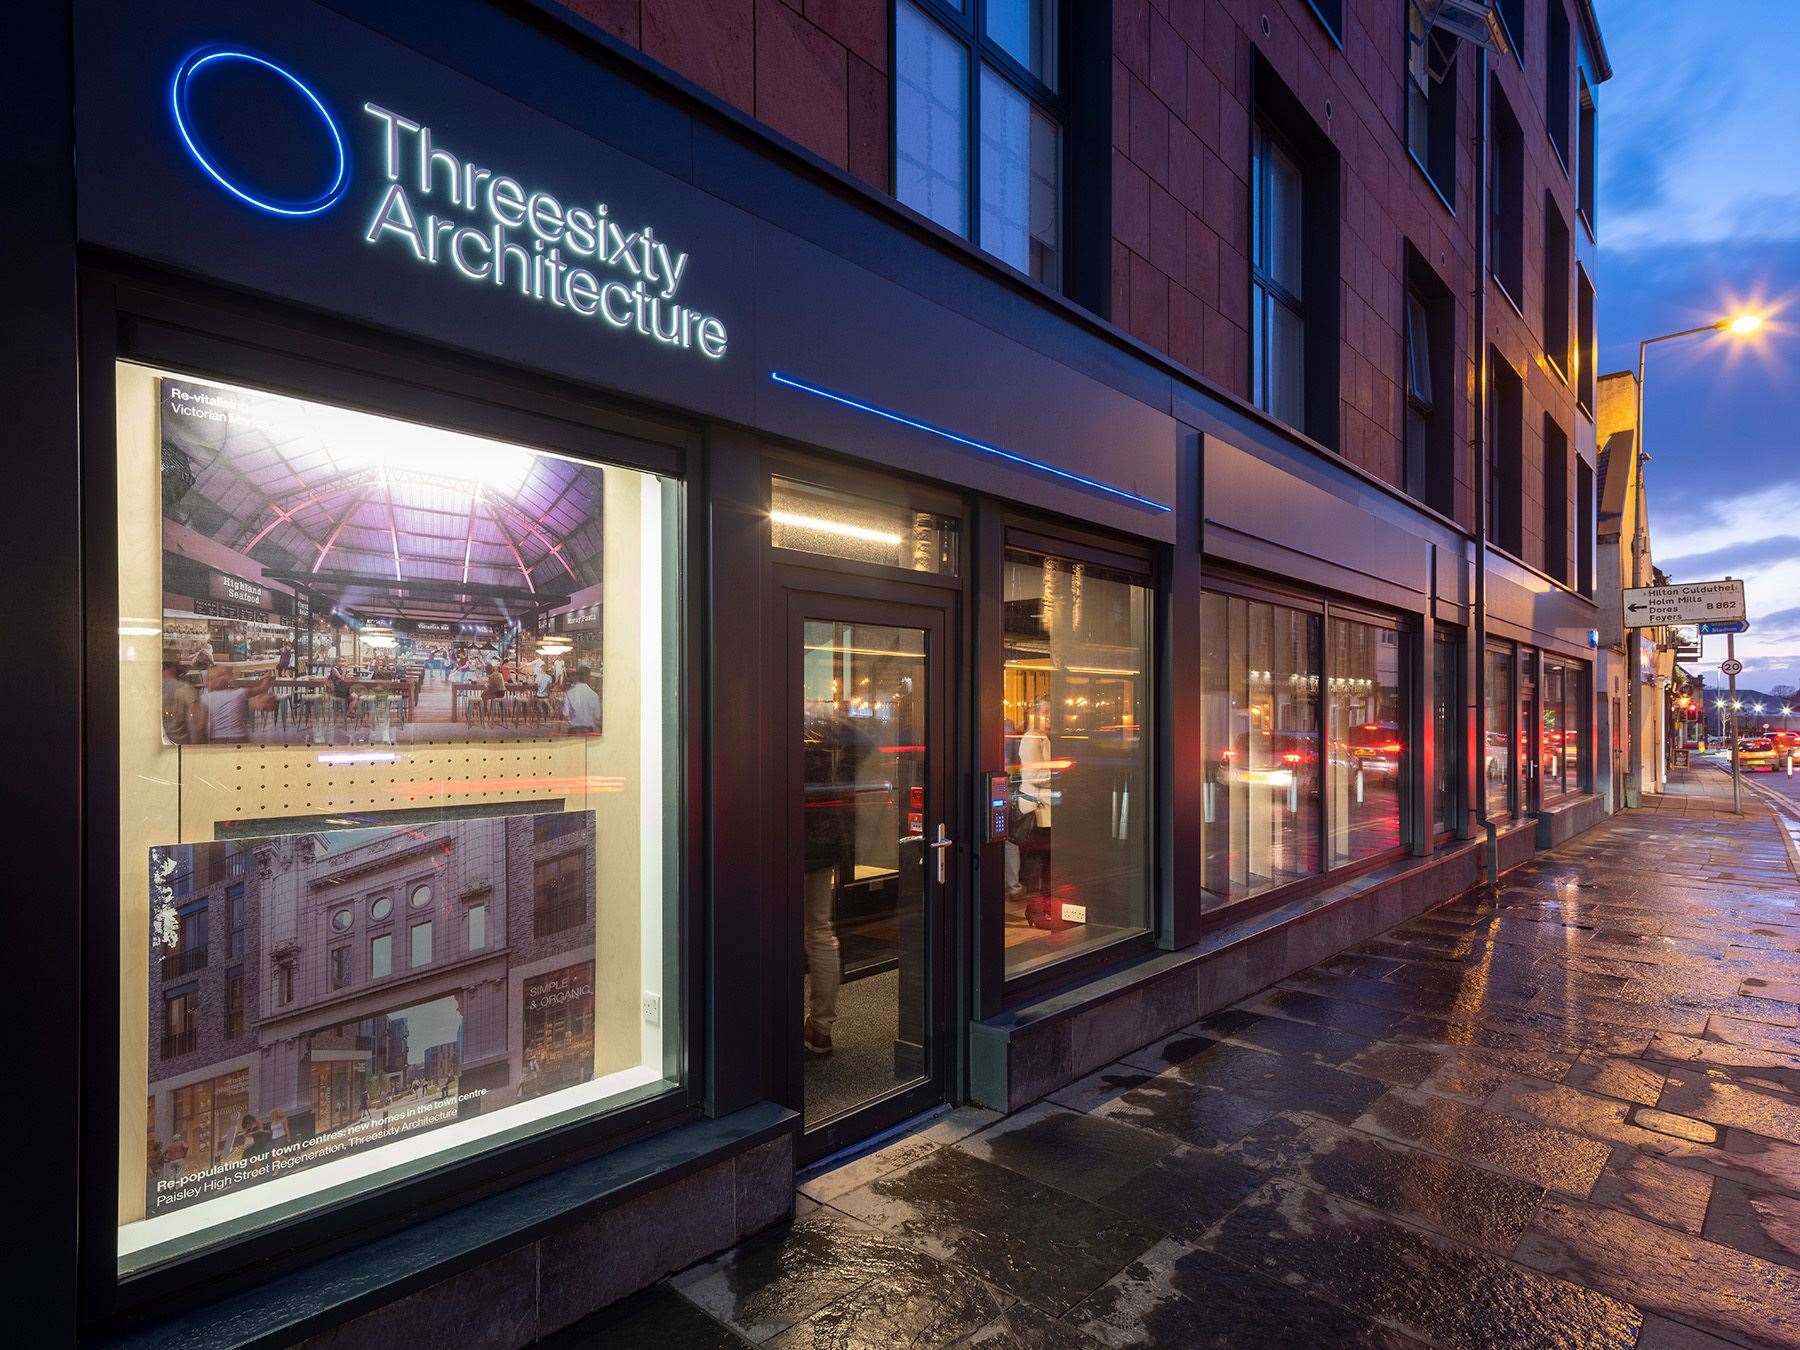 The exterior of Threesixty Architecture's Academy Street practice. Picture: McAteer Photograph.